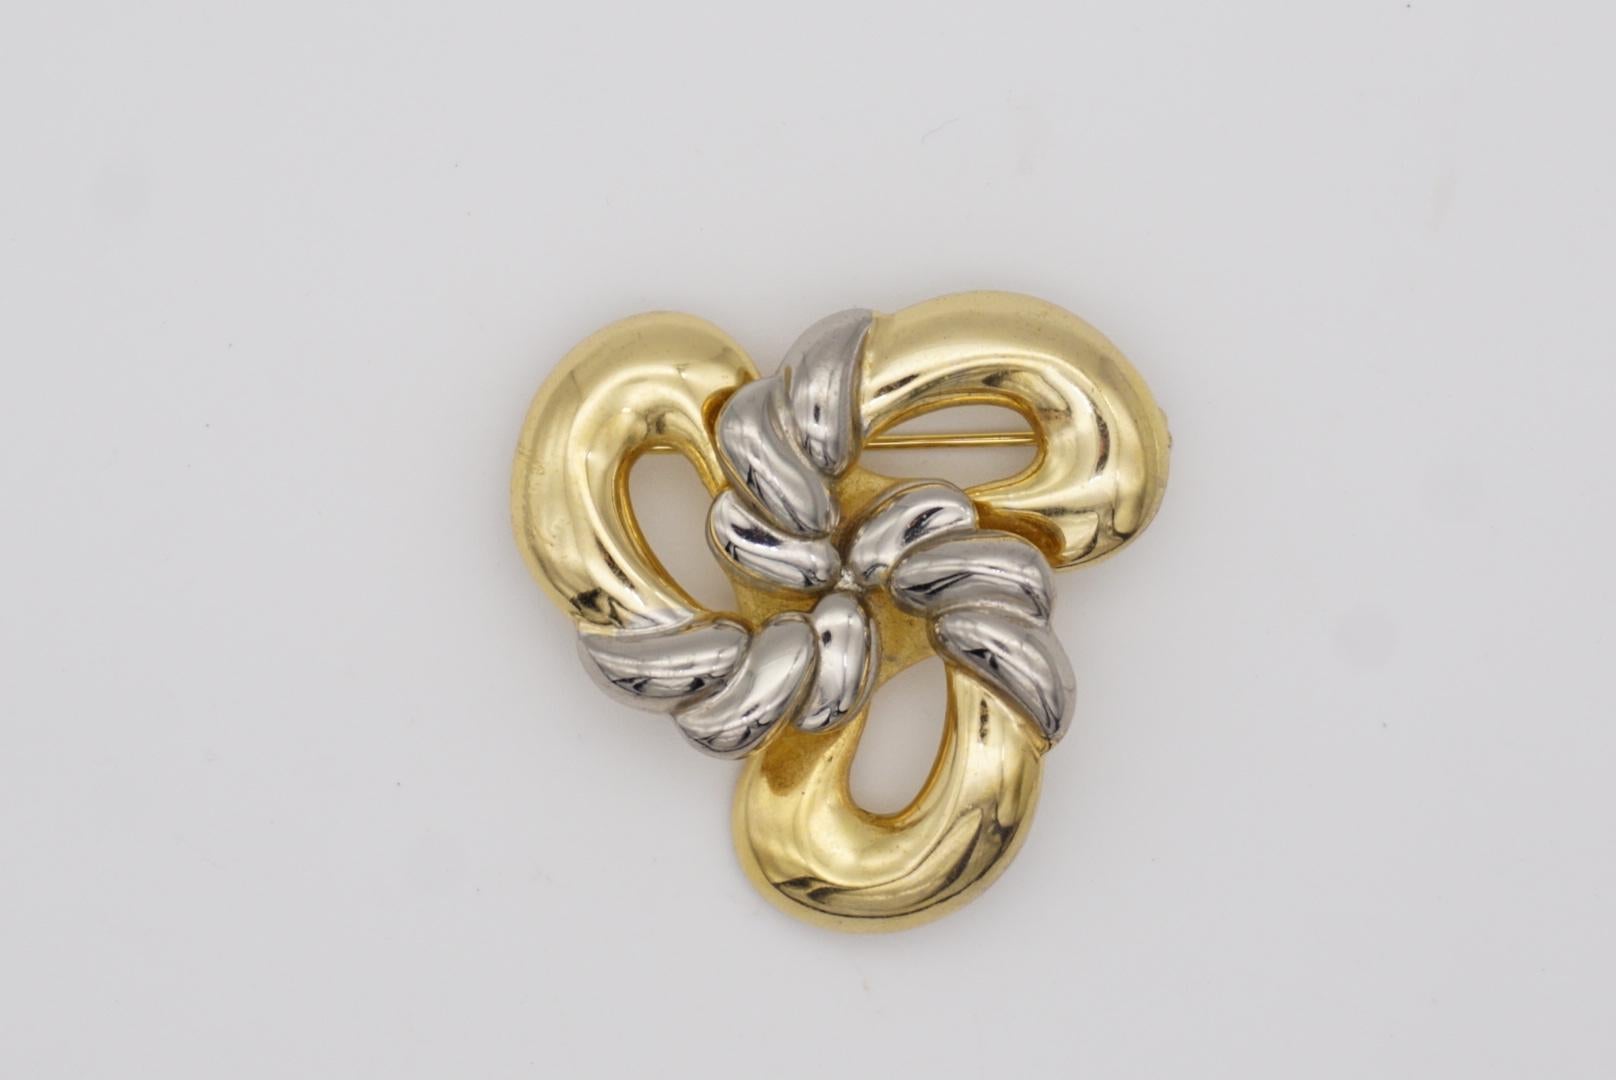 Christian Dior GROSSE 1969 Vintage Trio Knot Bows Swirl Twist Gold Silver Brooch For Sale 1